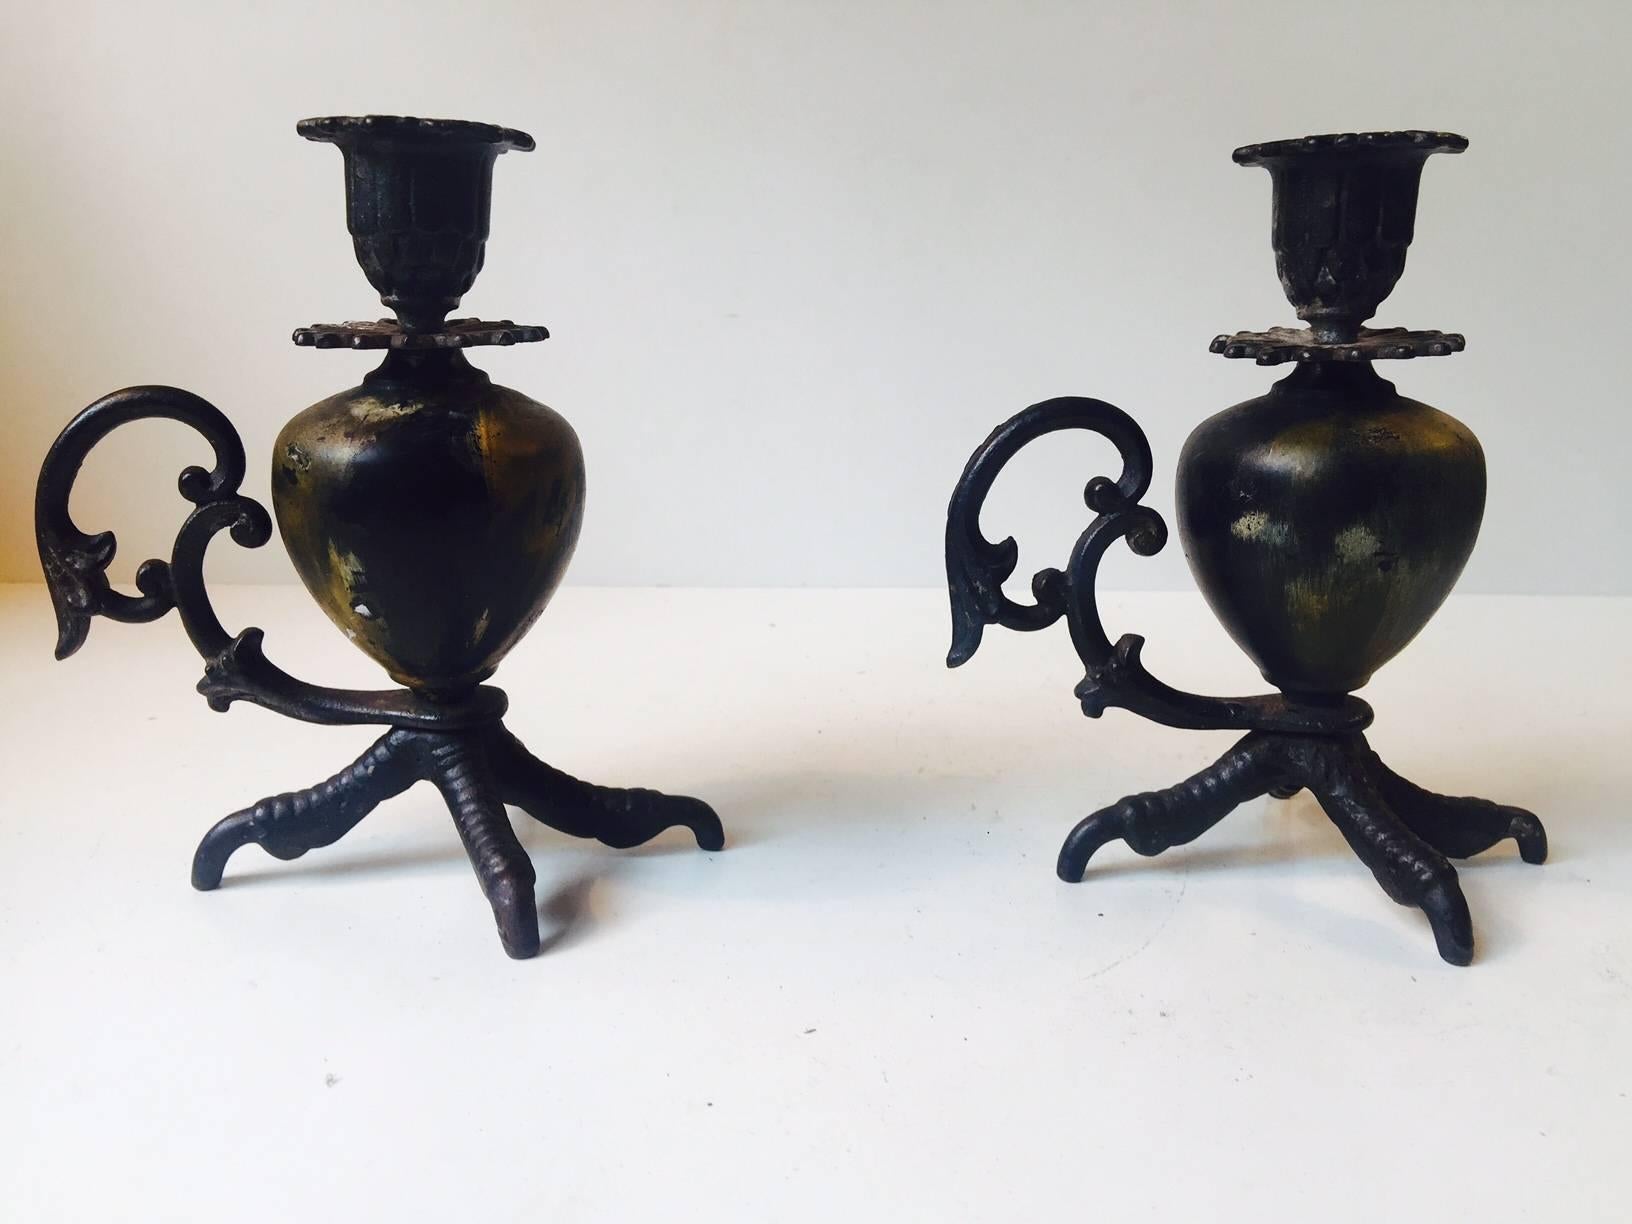 A pair of wrought Iron candlesticks featuring Talon Claw bases, glazed ceramic Baluster shaped centrepieces and detailed Gothic Handles. They are of European origin, presumably France.